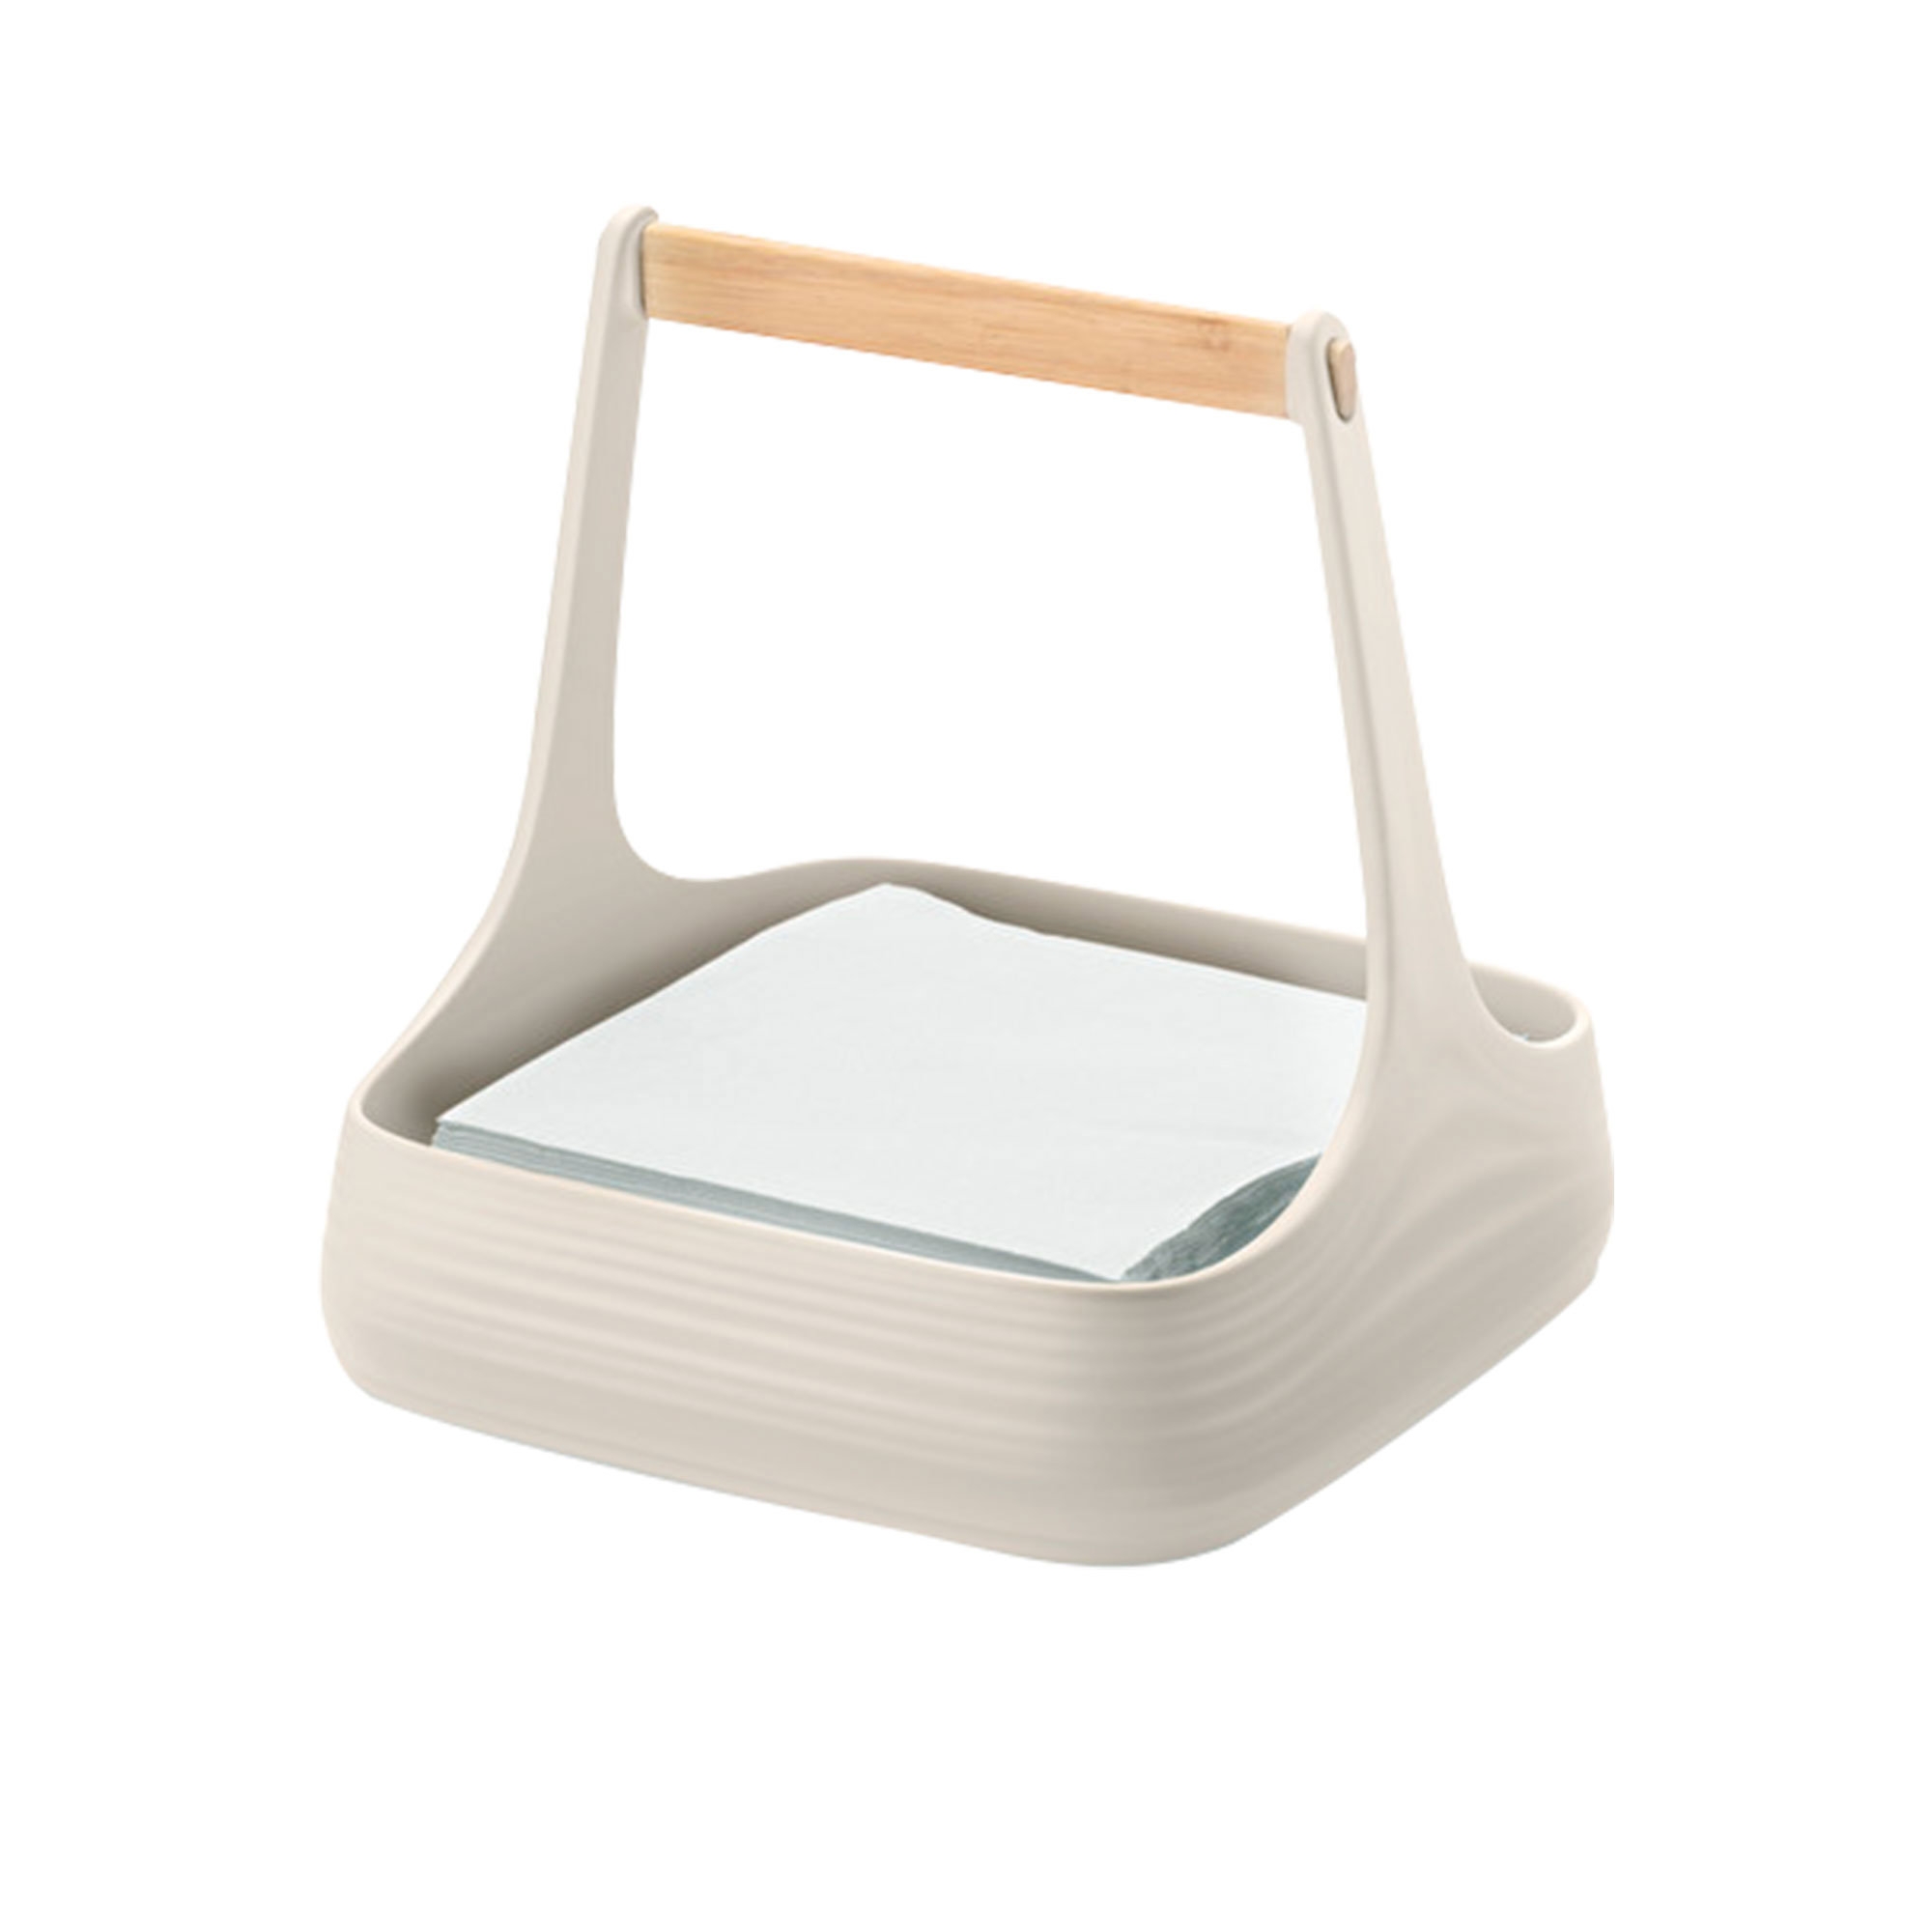 Guzzini Earth All Together Table Caddy White Image 2